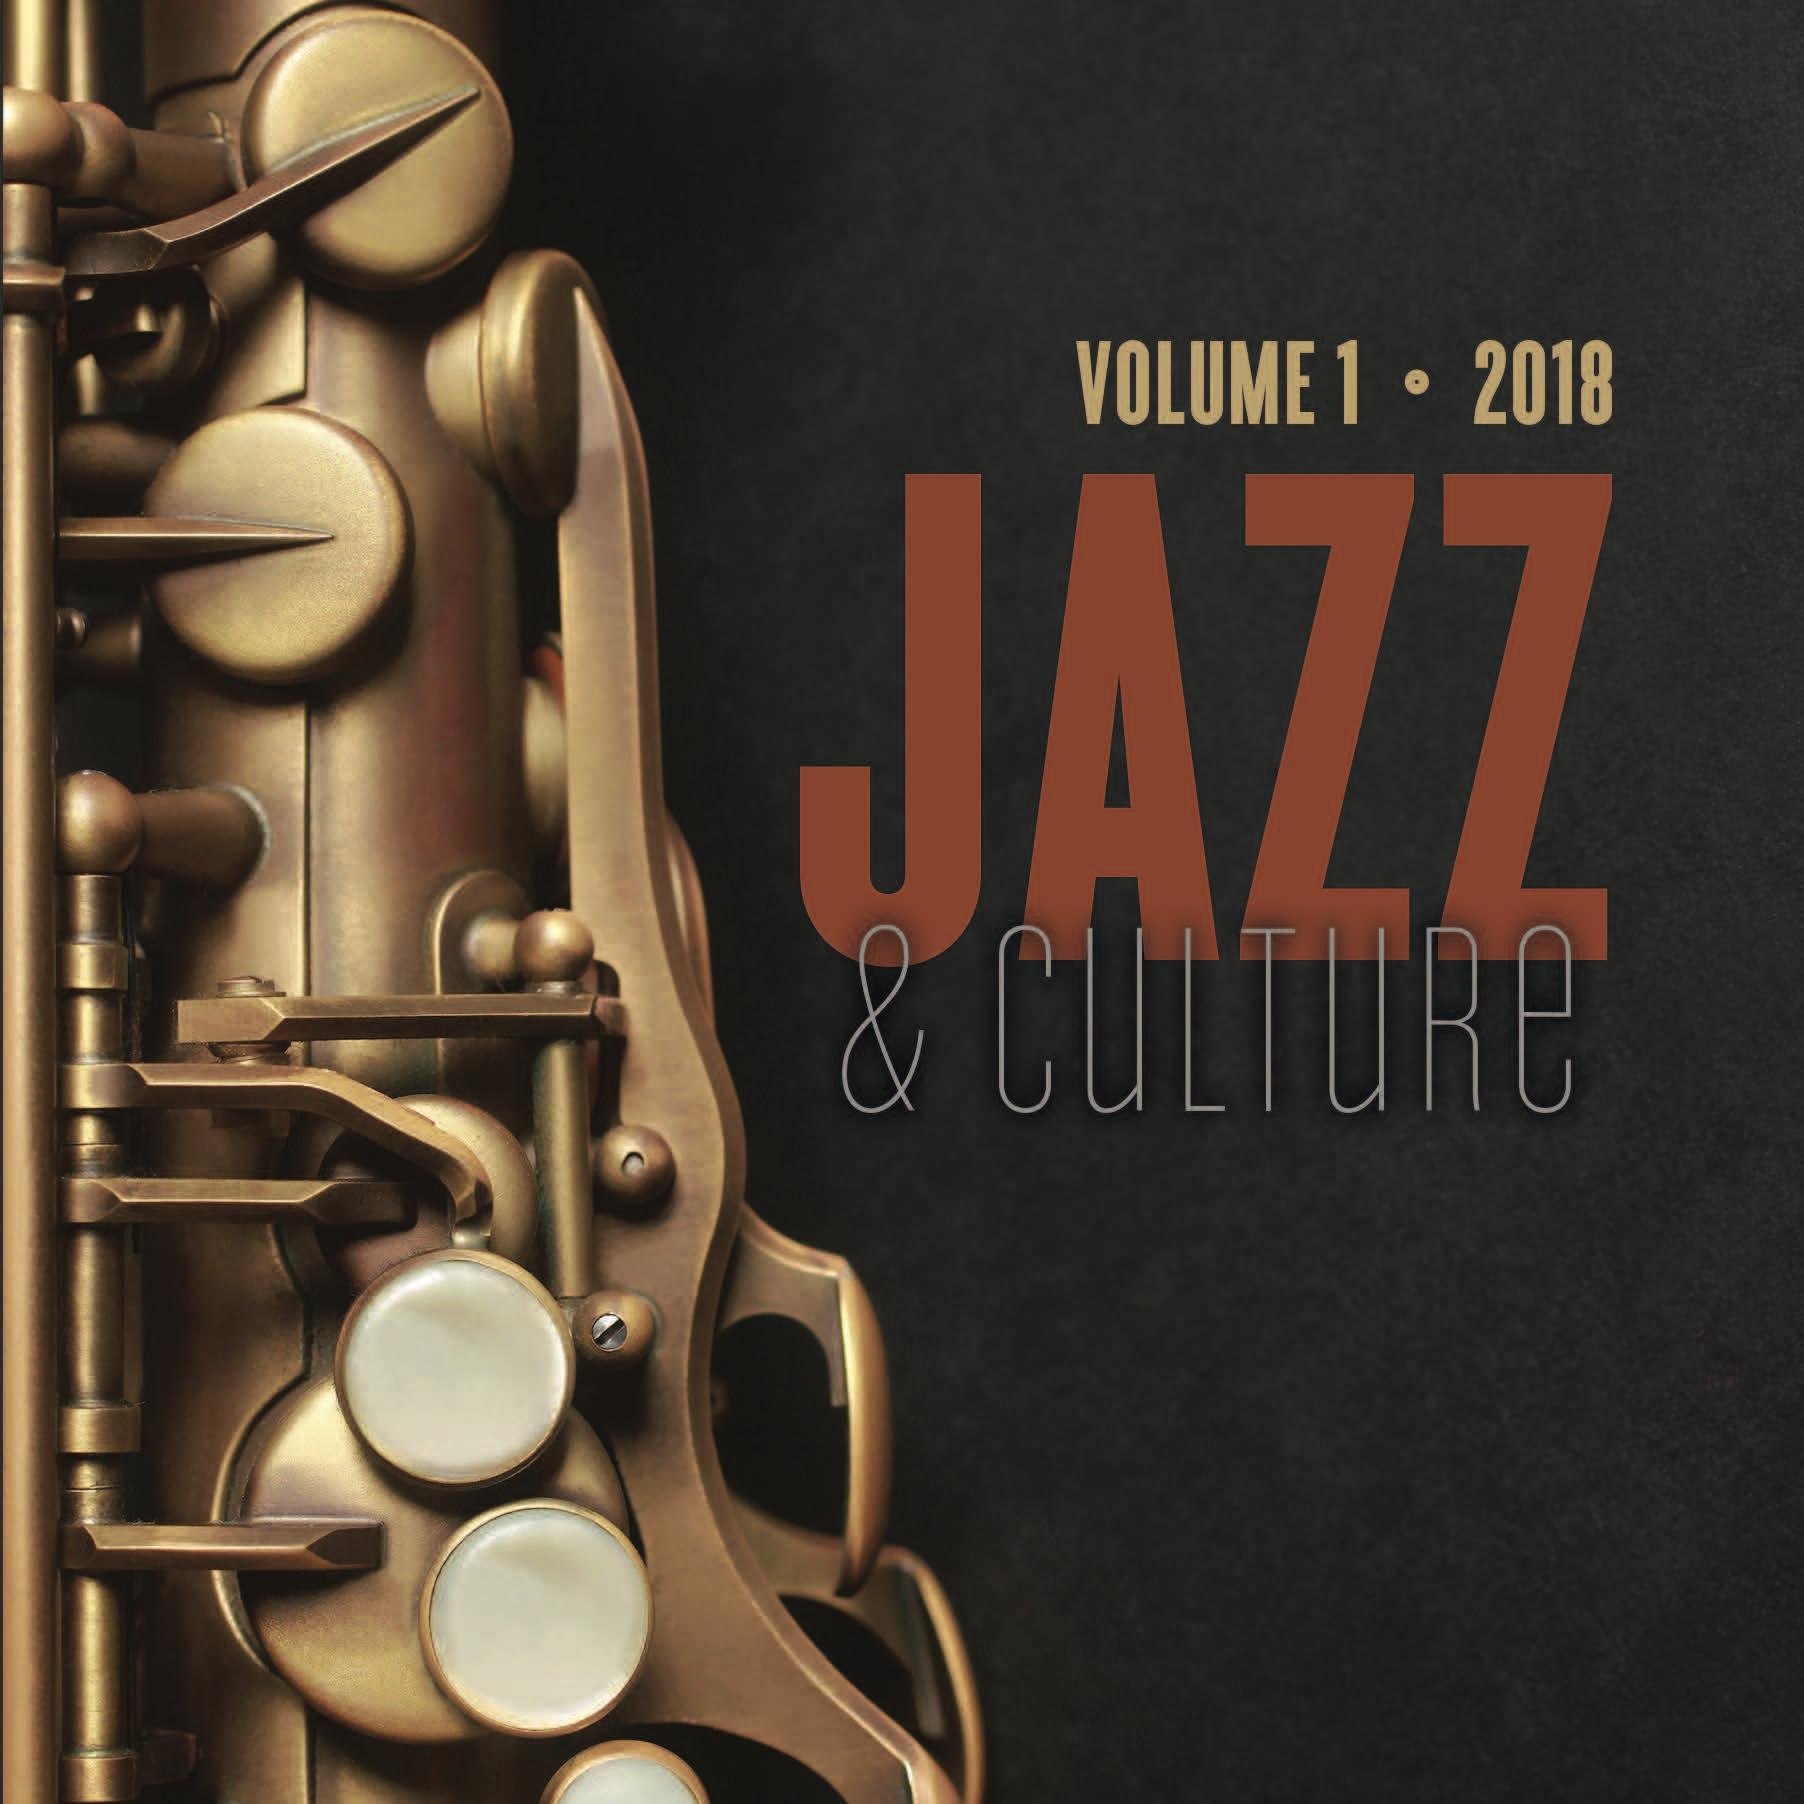 Jazz and Culture is an annual, peer-reviewed publication devoted to publishing cutting-edge research on jazz from multiple perspectives.